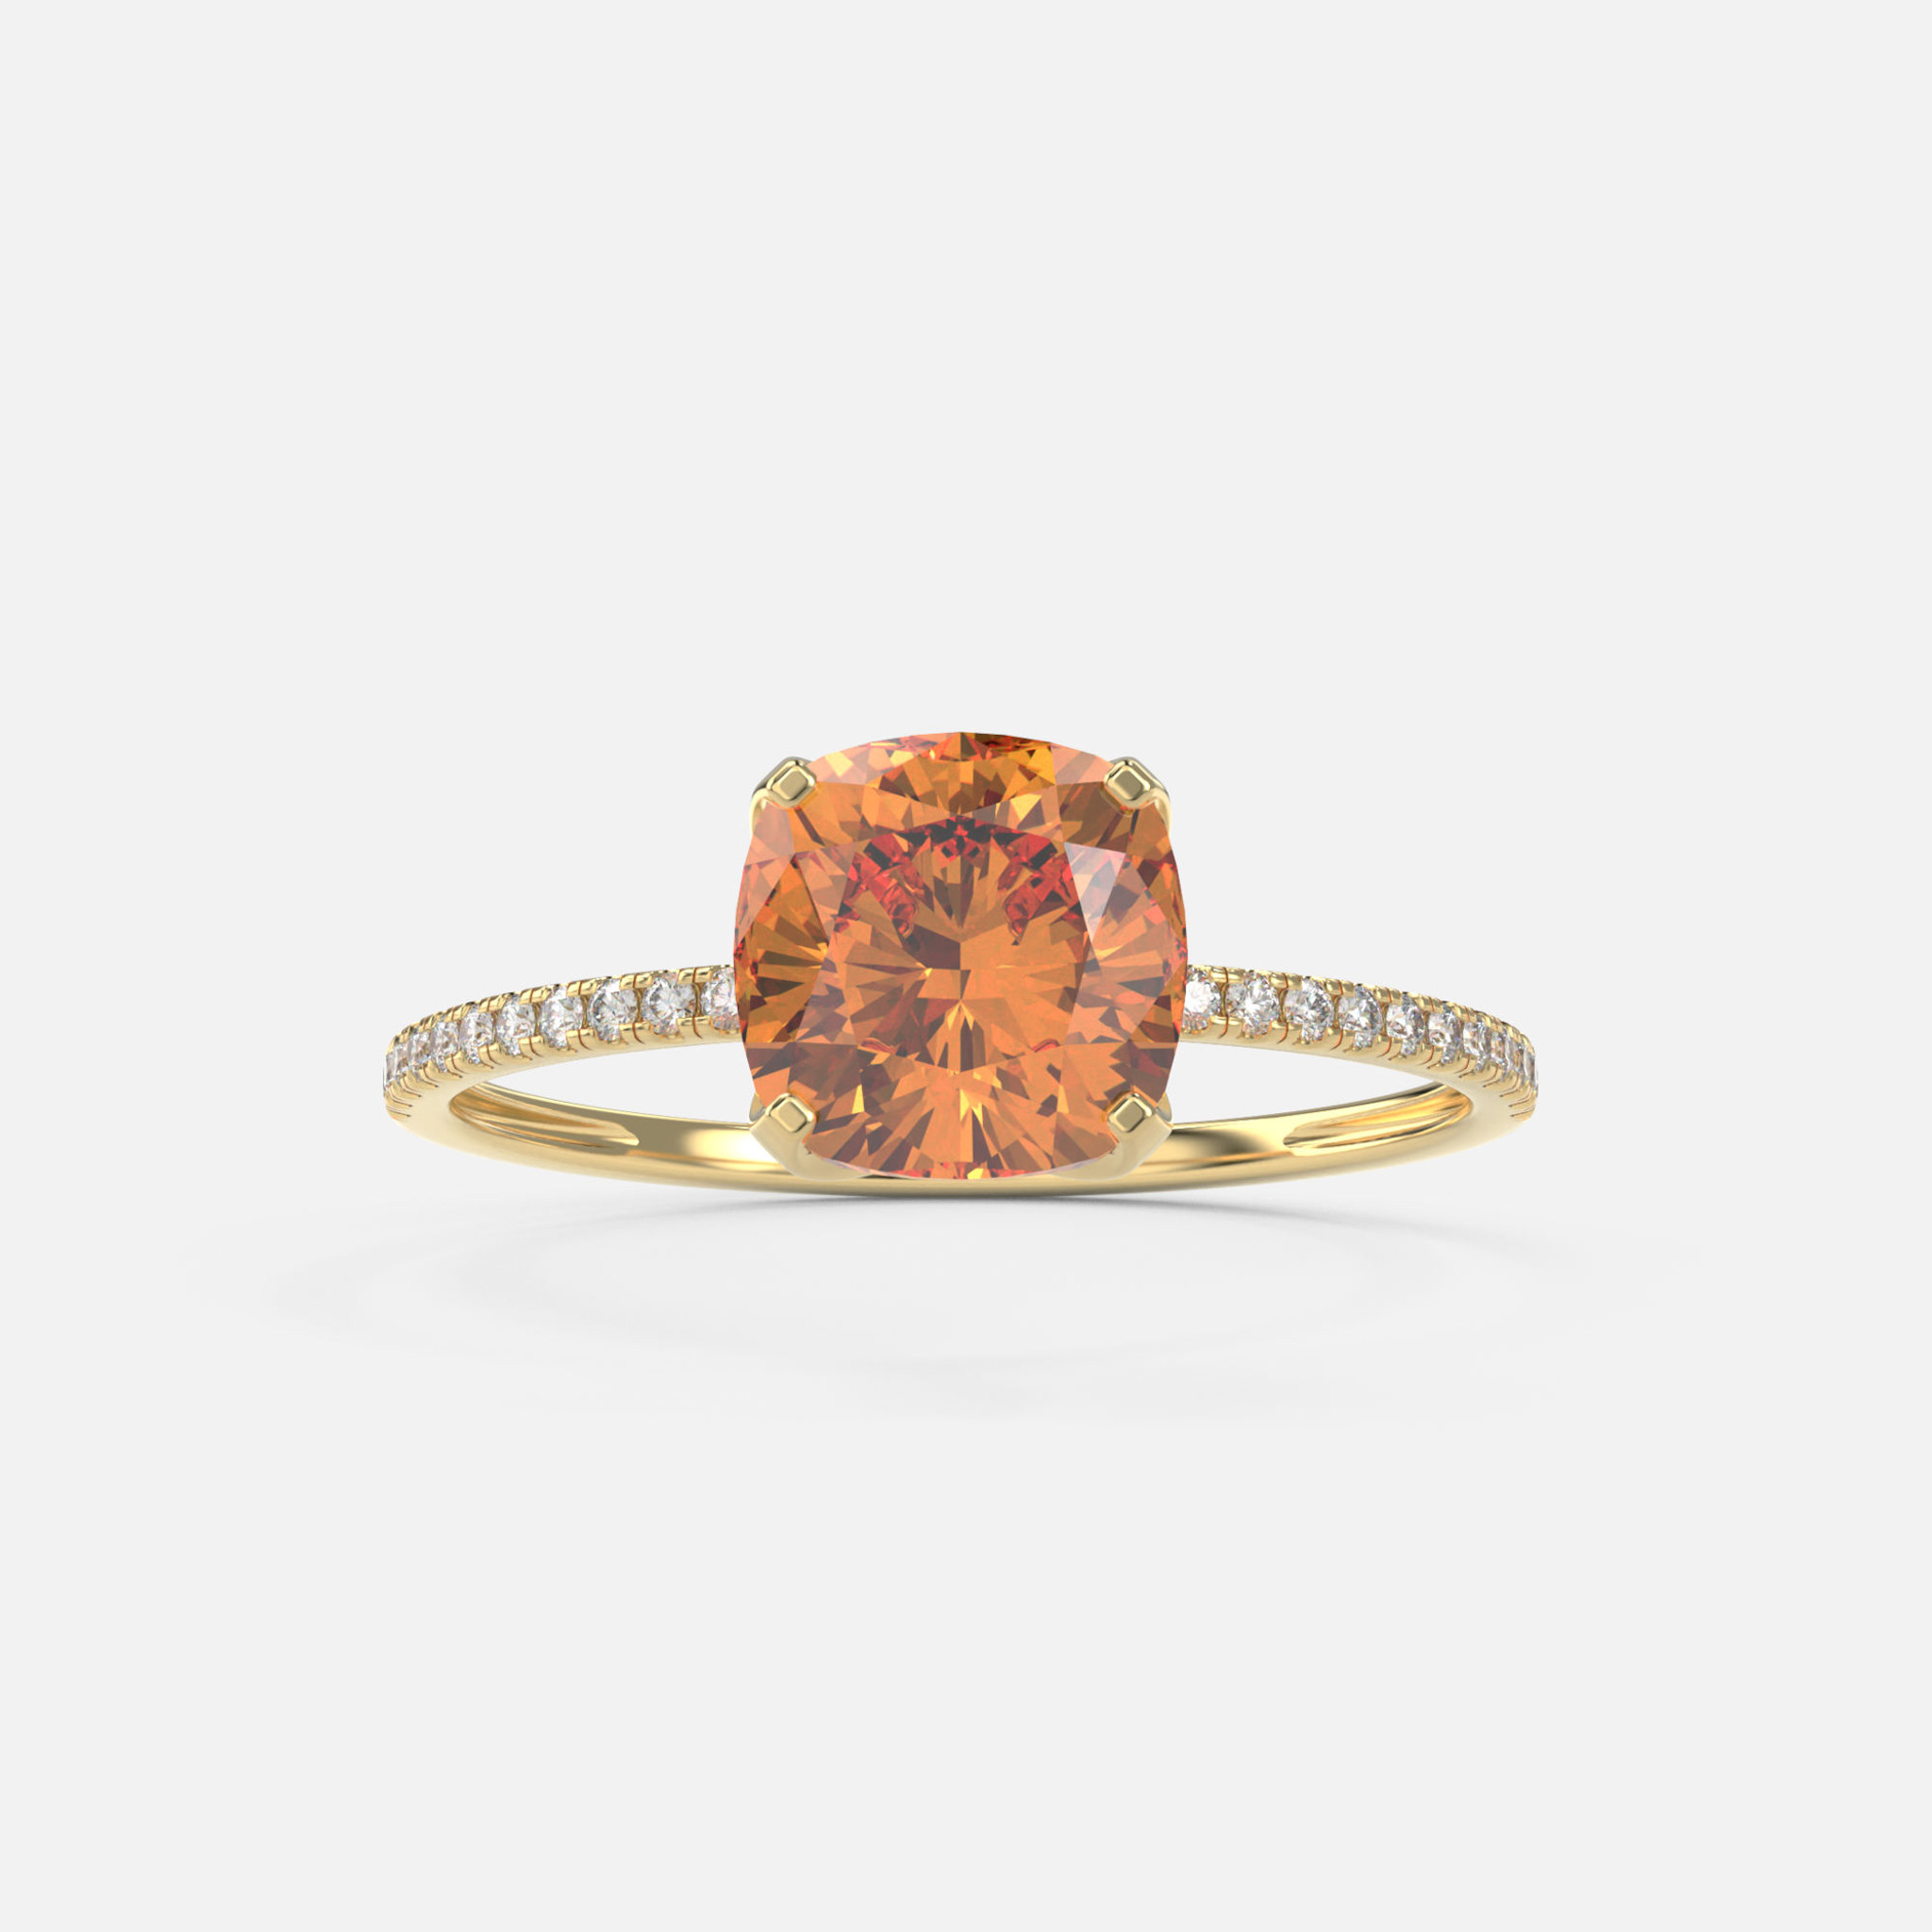 A front view of our 14k Gold Citrine Diamond Ring—a brilliant 1.55ct gem in solid yellow gold, surrounded by 0.09ct diamonds.